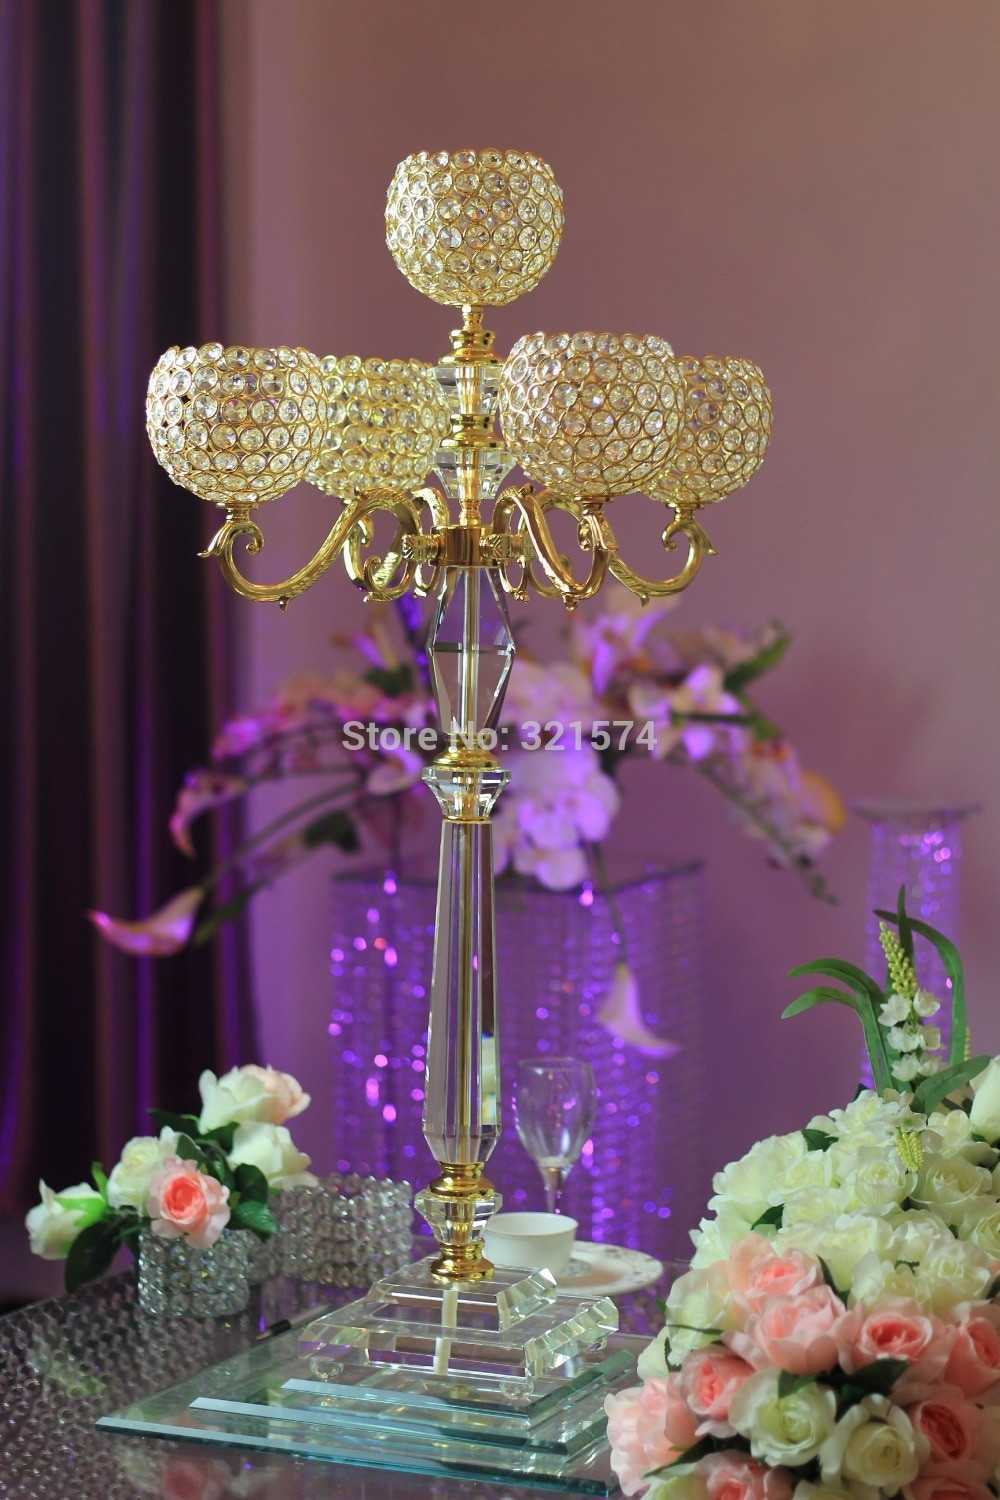 15 Fashionable Tall Wedding Vases for Sale 2024 free download tall wedding vases for sale of wedding crystal globe centerpieces 5arm 47 24inch tall metal gold with wedding crystal globe centerpieces 5arm 47 24inch tall metal gold crystal candelabras ca